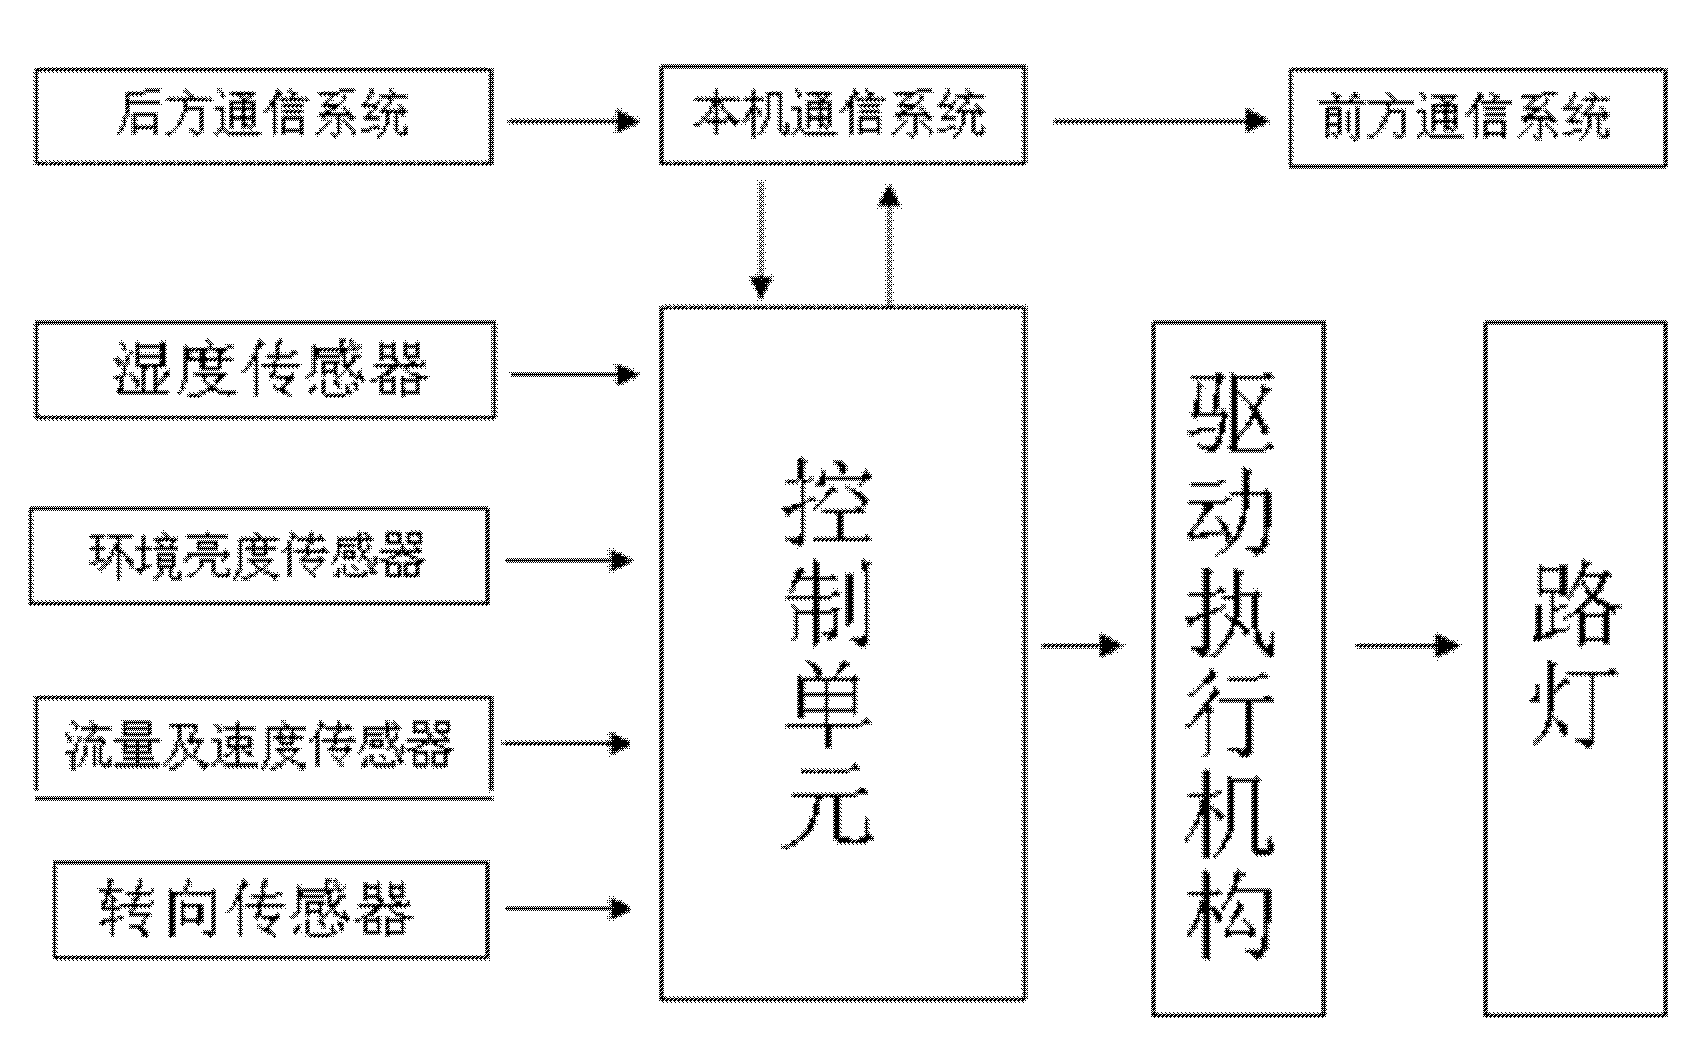 Streetlight network control method and network structure thereof